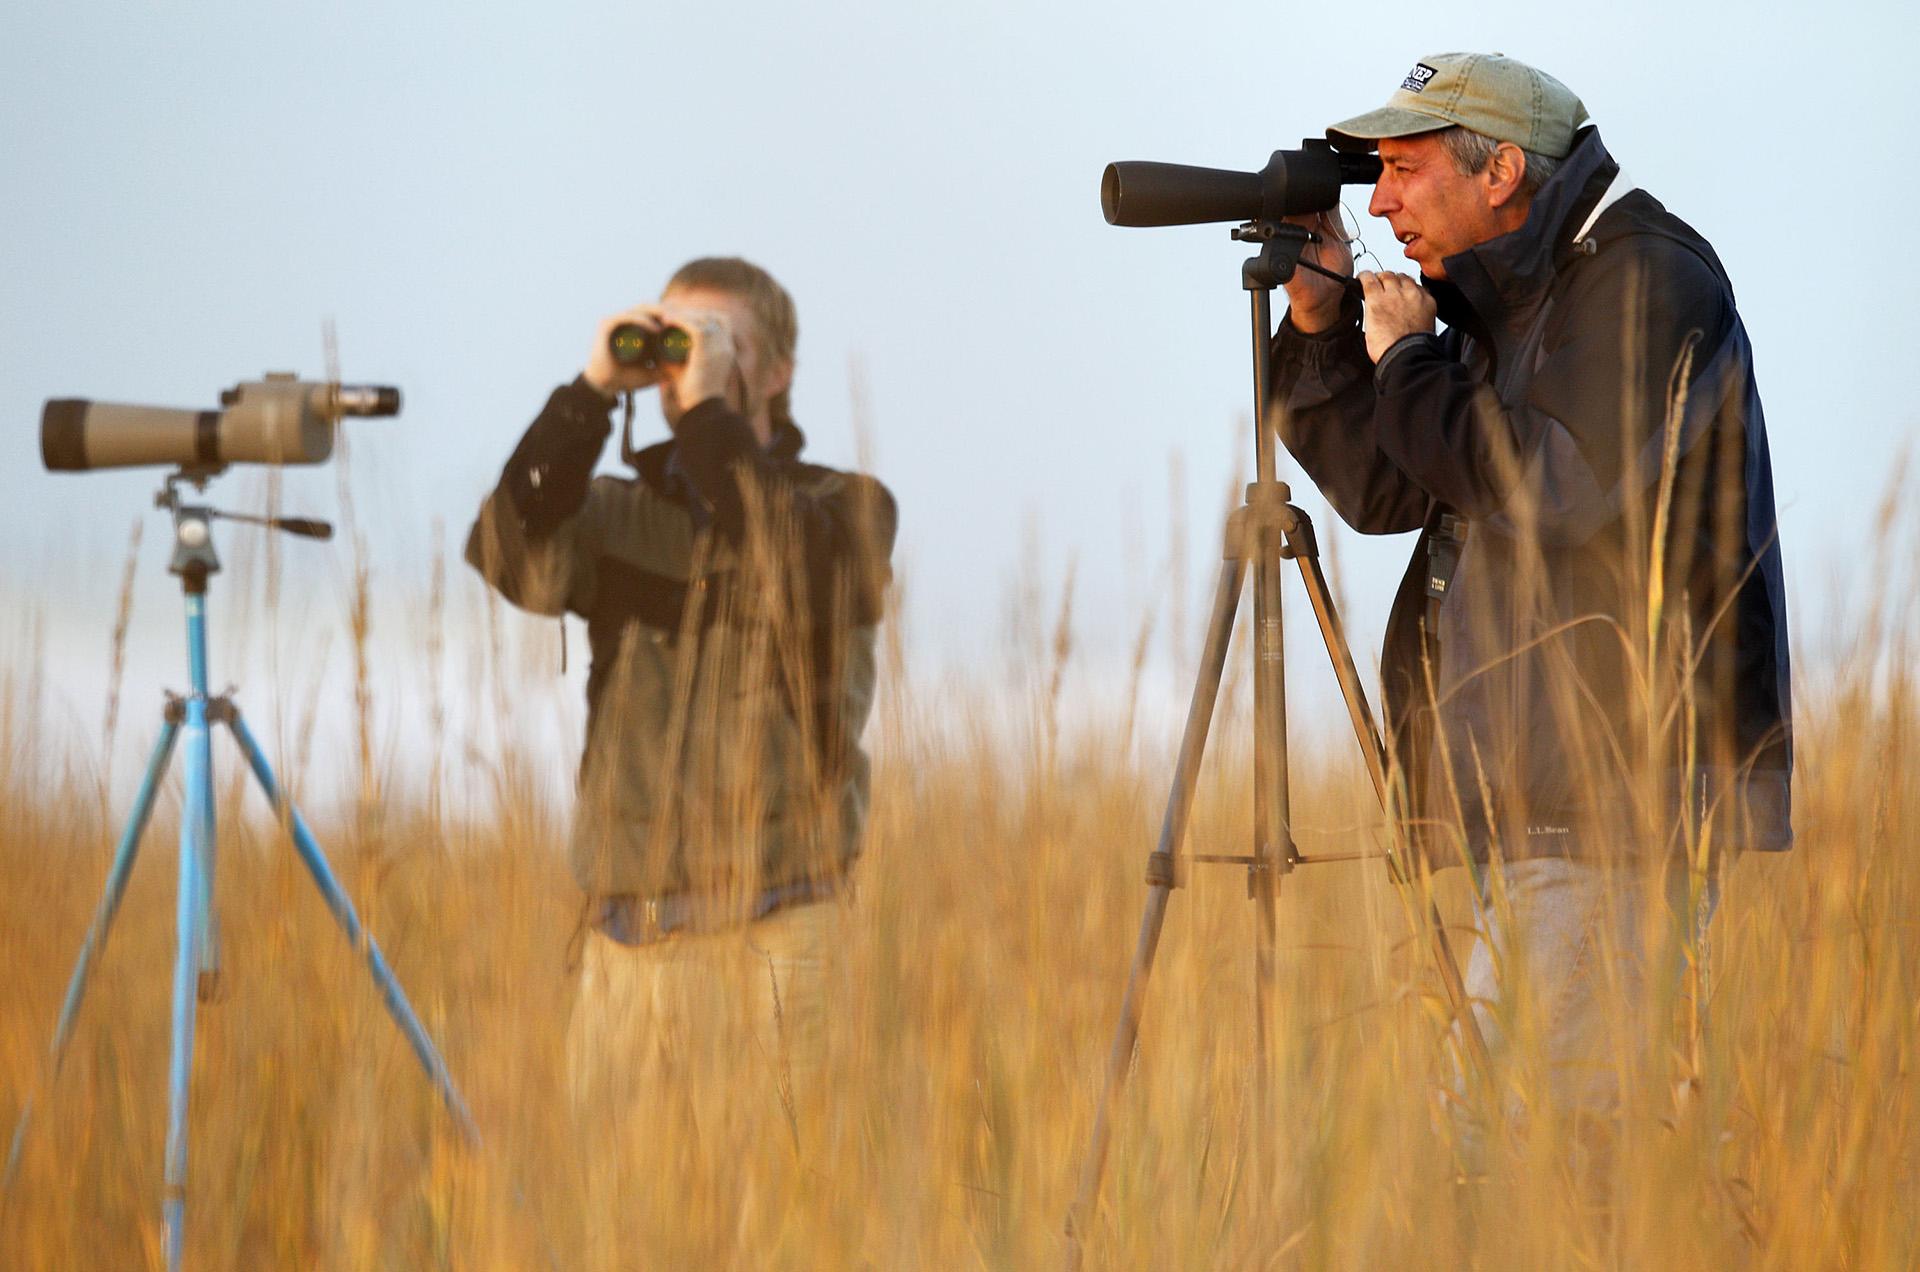 In this Dec. 22, 2010, file photo, Chris Brantley, right, of Mandiville, Louisiana, and Hans Holbrook, of LaPlace, Louisiana, look though monoculars for birds during the National Audubon Society’s annual Christmas bird count on the Gulf Coast in Grand Isle, Louisiana. (AP Photo / Sean Gardner, File)